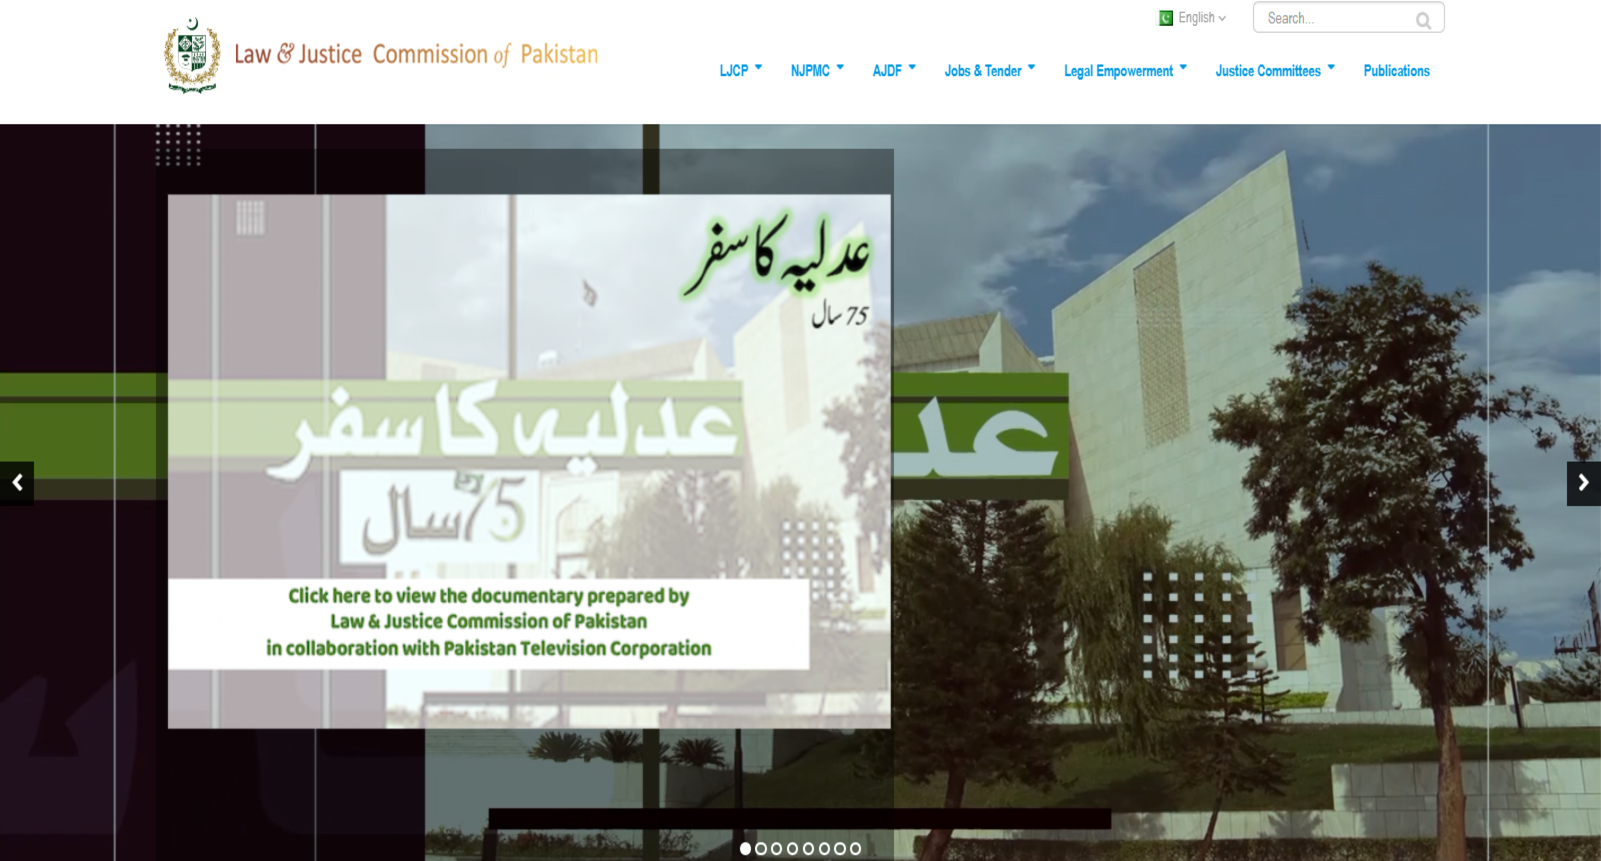 Law & Justice Commission of Pakistan (1)